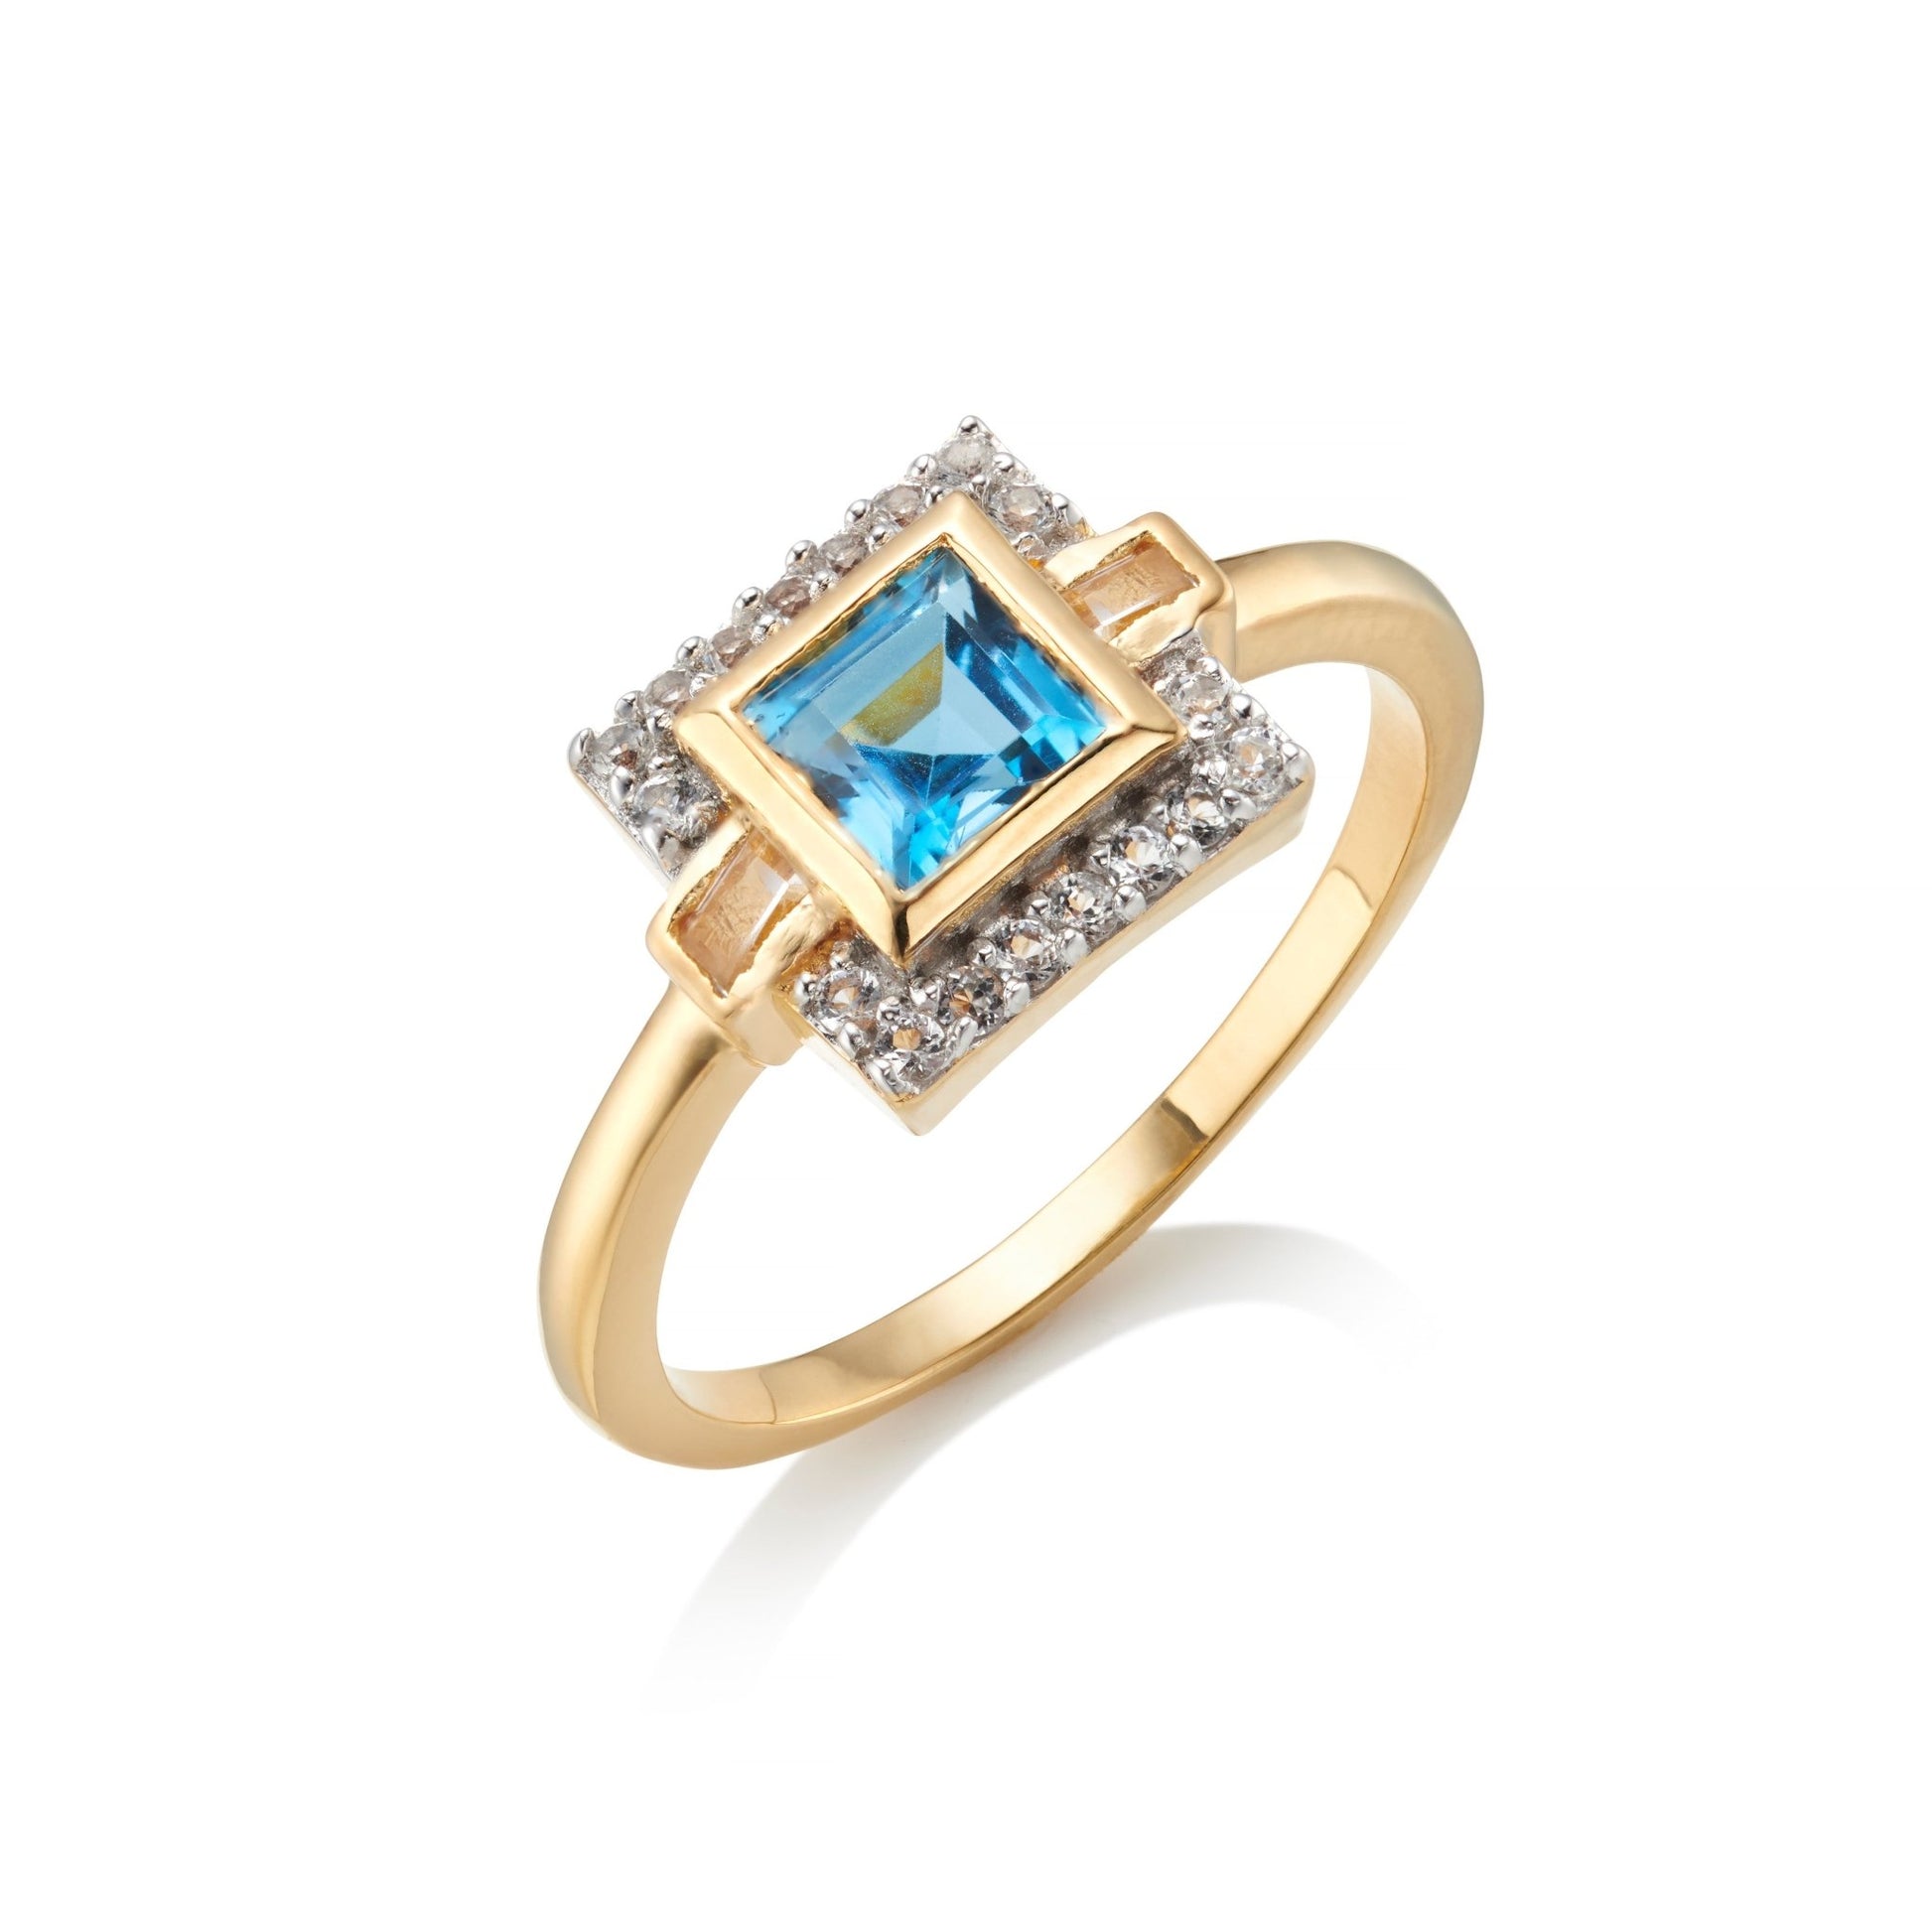 9CT YELLOW GOLD LONDON BLUE TOPAZ VINTAGE RING - Fool's Gold Jewellery